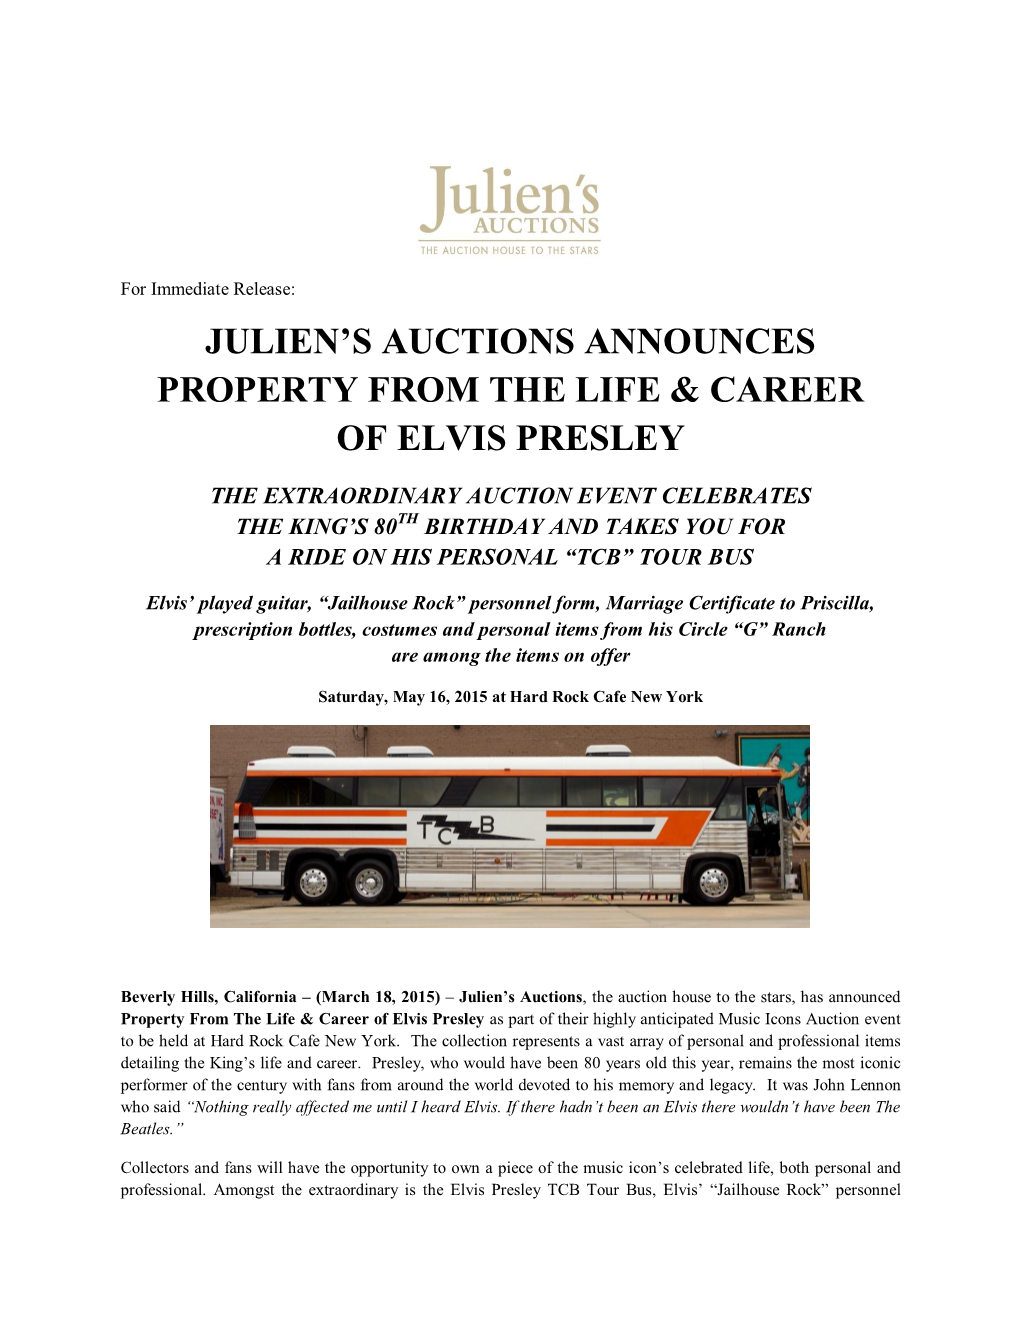 Julien's Auctions Announces Property from the Life